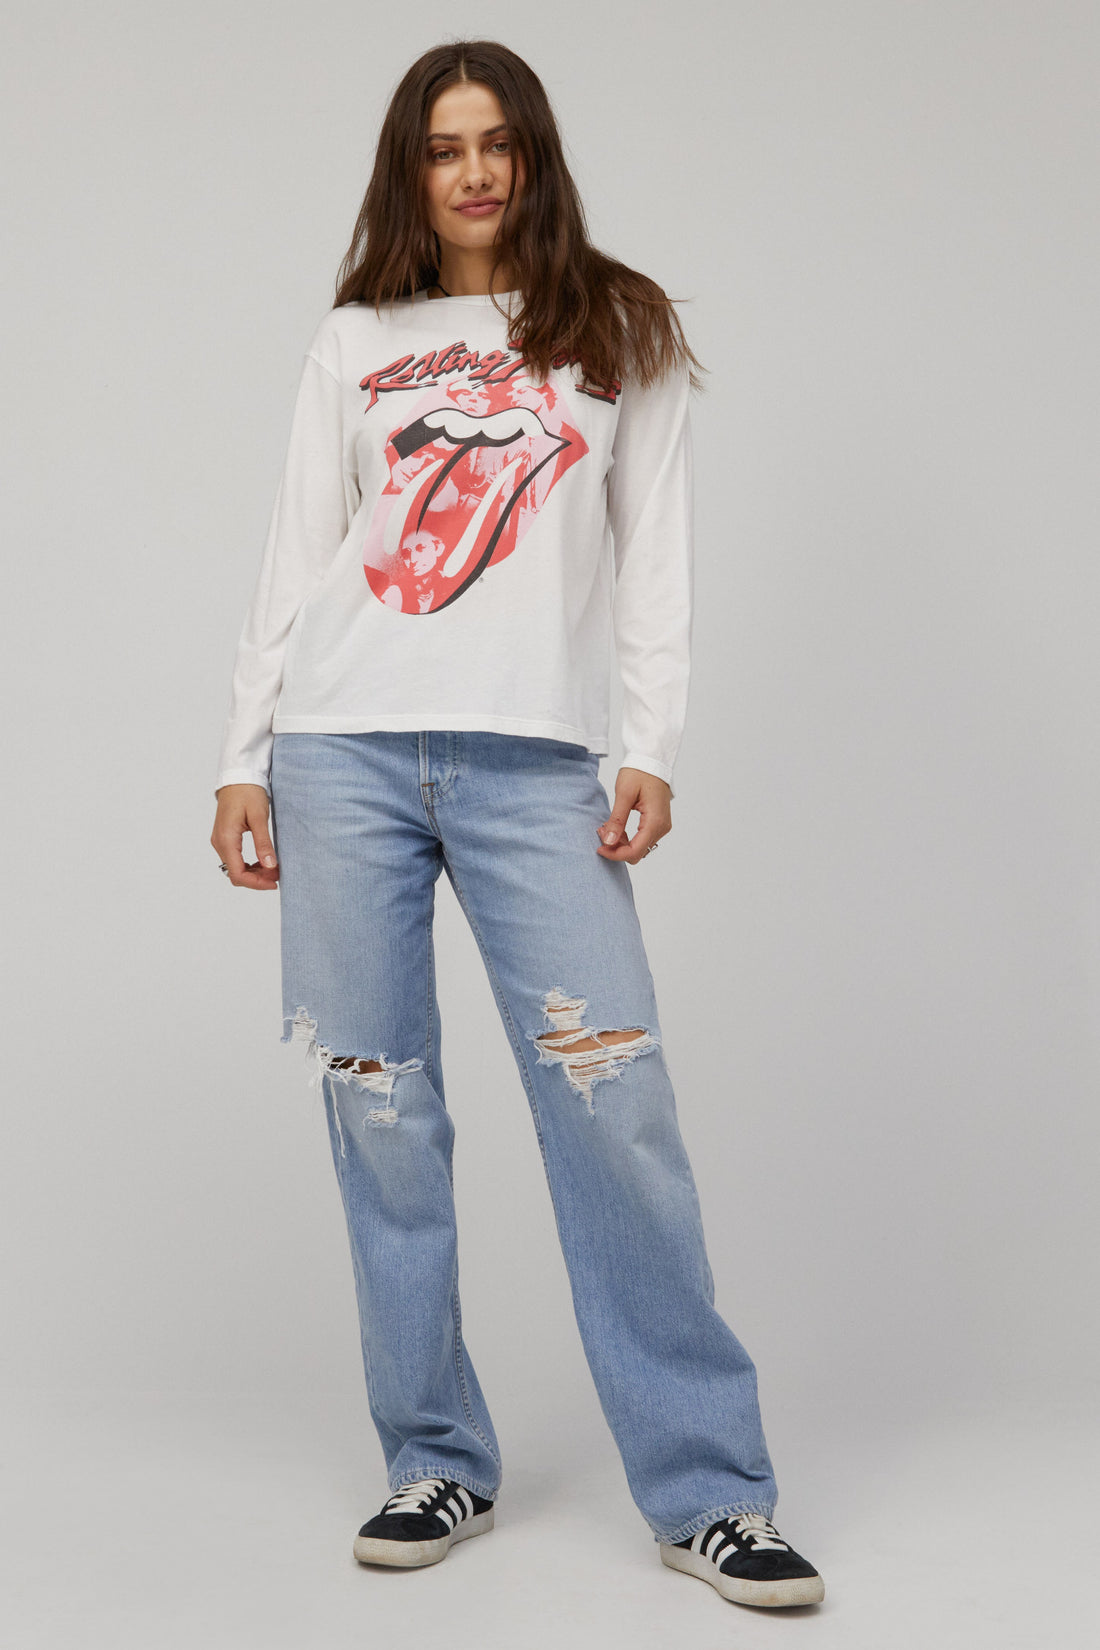 Rolling Stones Band Crew Bleach White